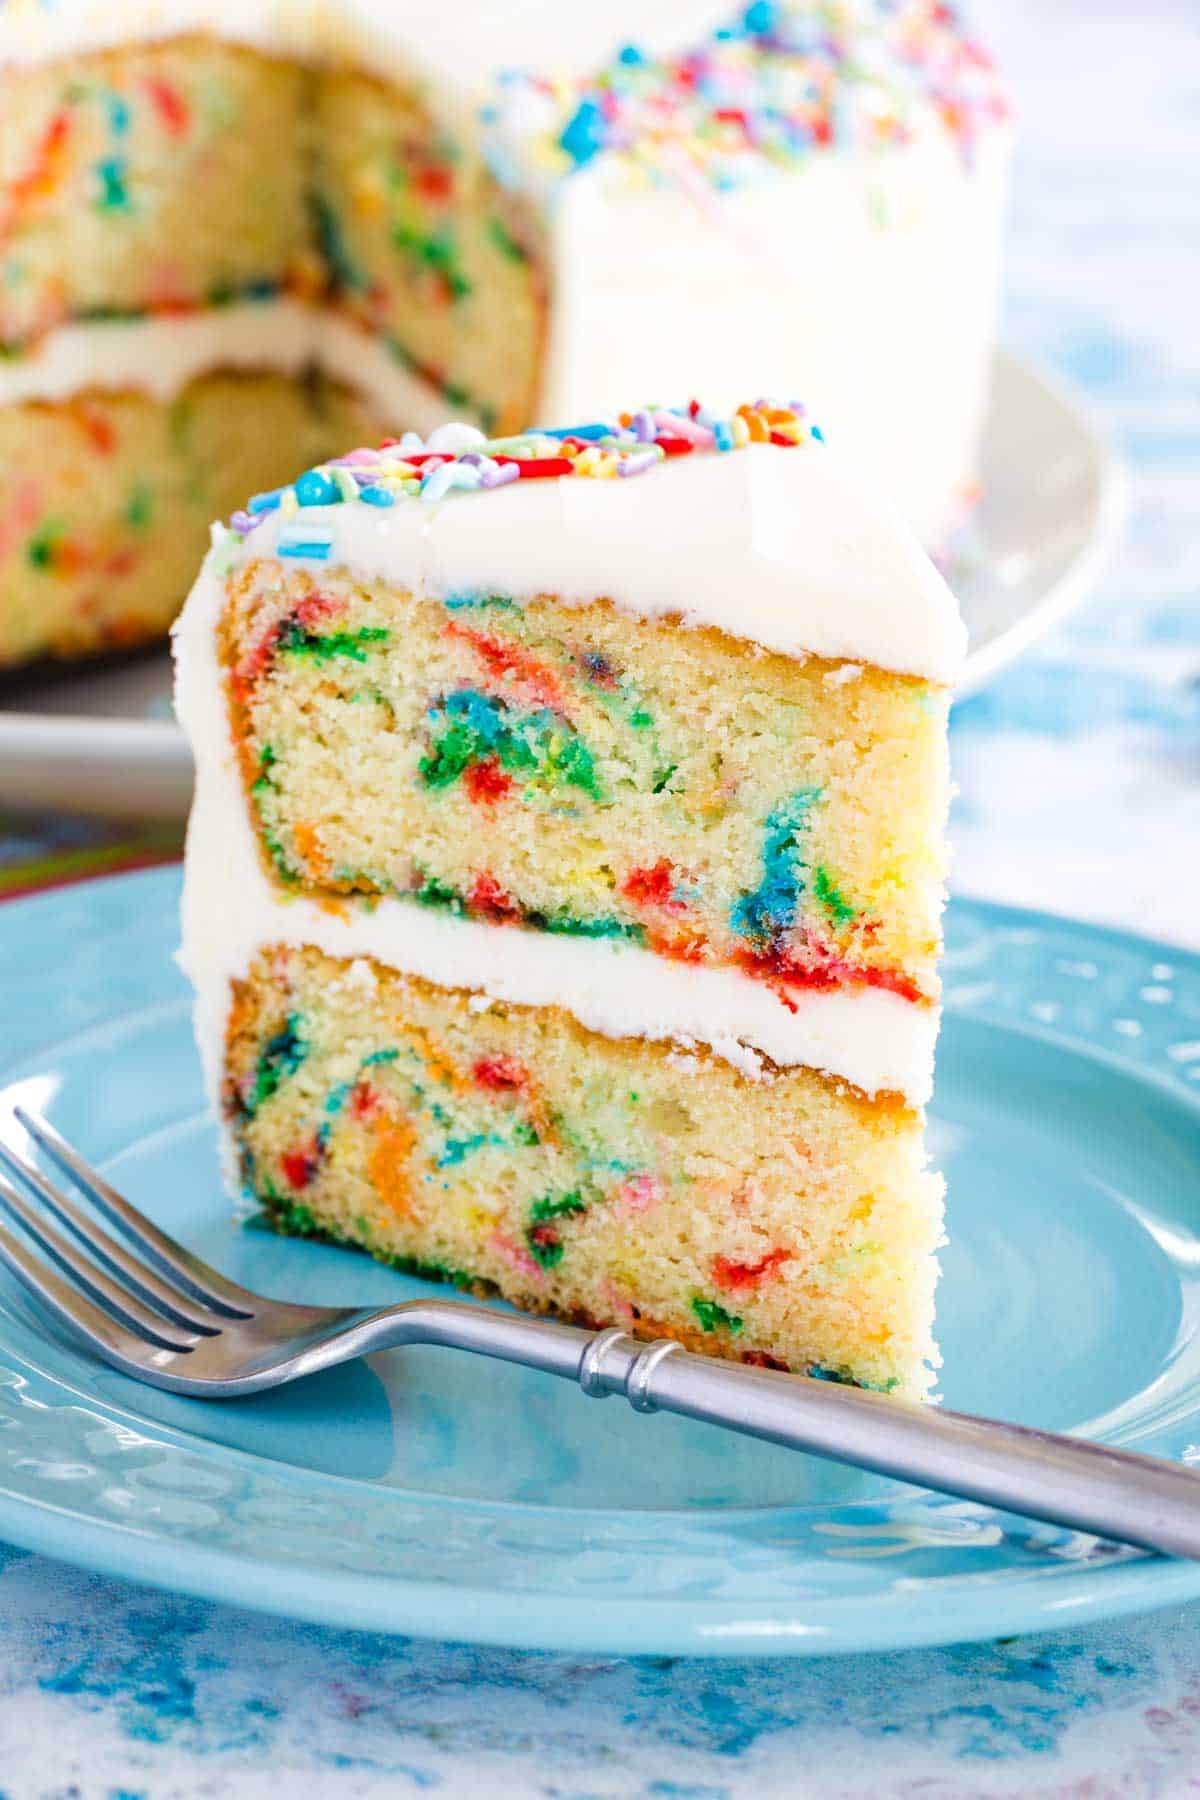 A slice of gluten free funfetti cake on a blue plate next to a fork.